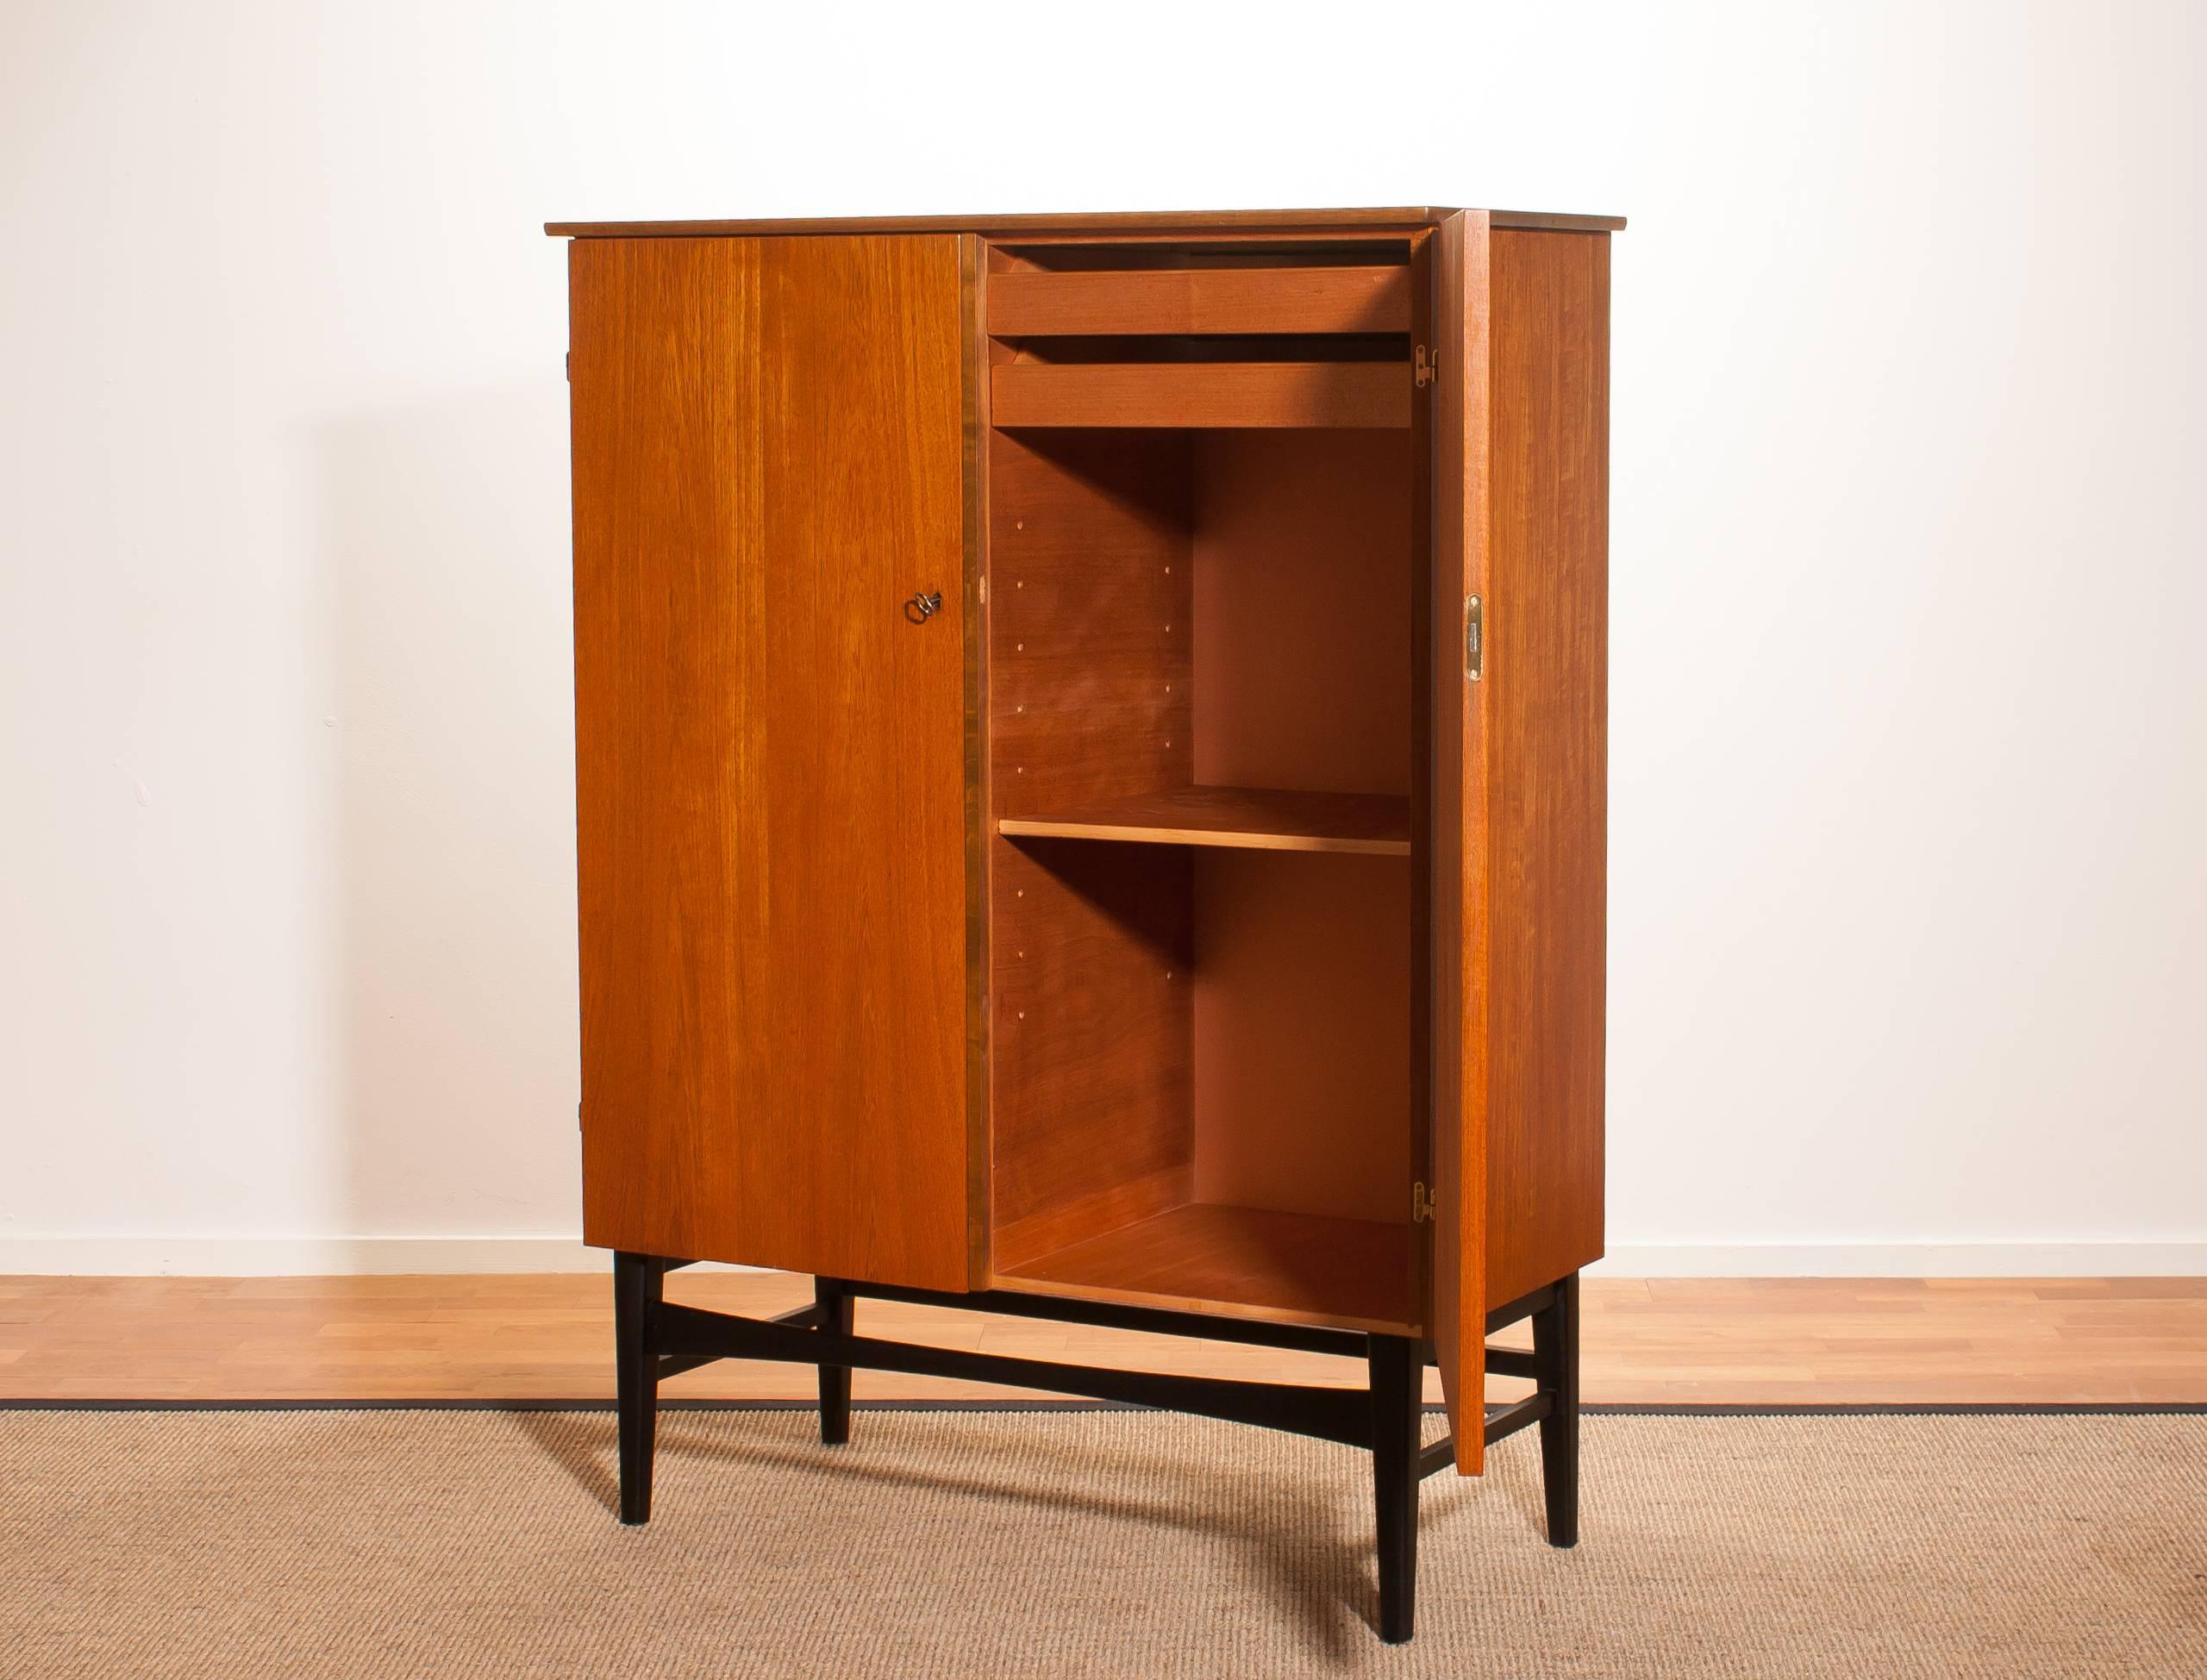 Very nice cabinet made in Sweden.
This cabinet is made of teak and beech .
It is in a nice condition.
Period 1950s
Dimensions : H.135 cm , W.100 cm , D.45 cm